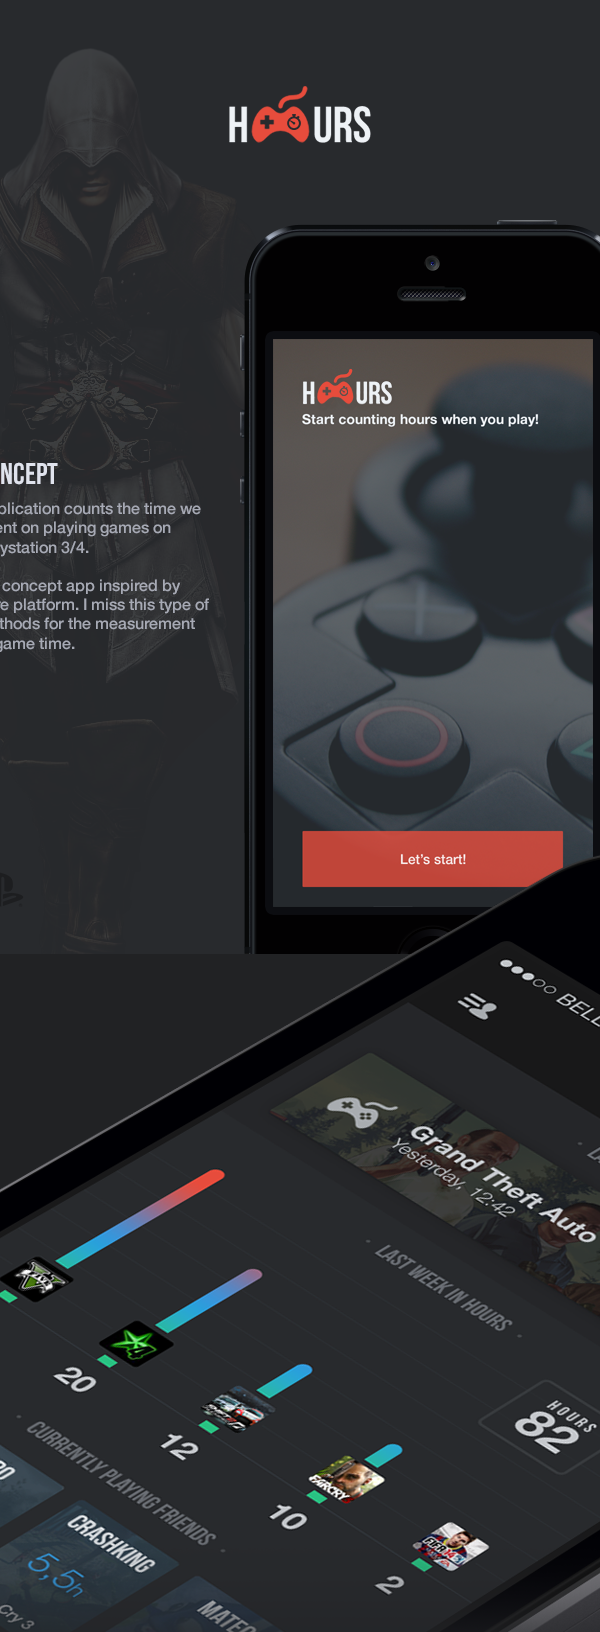 UI ux ios app mobile flat iphone Games playstation hours